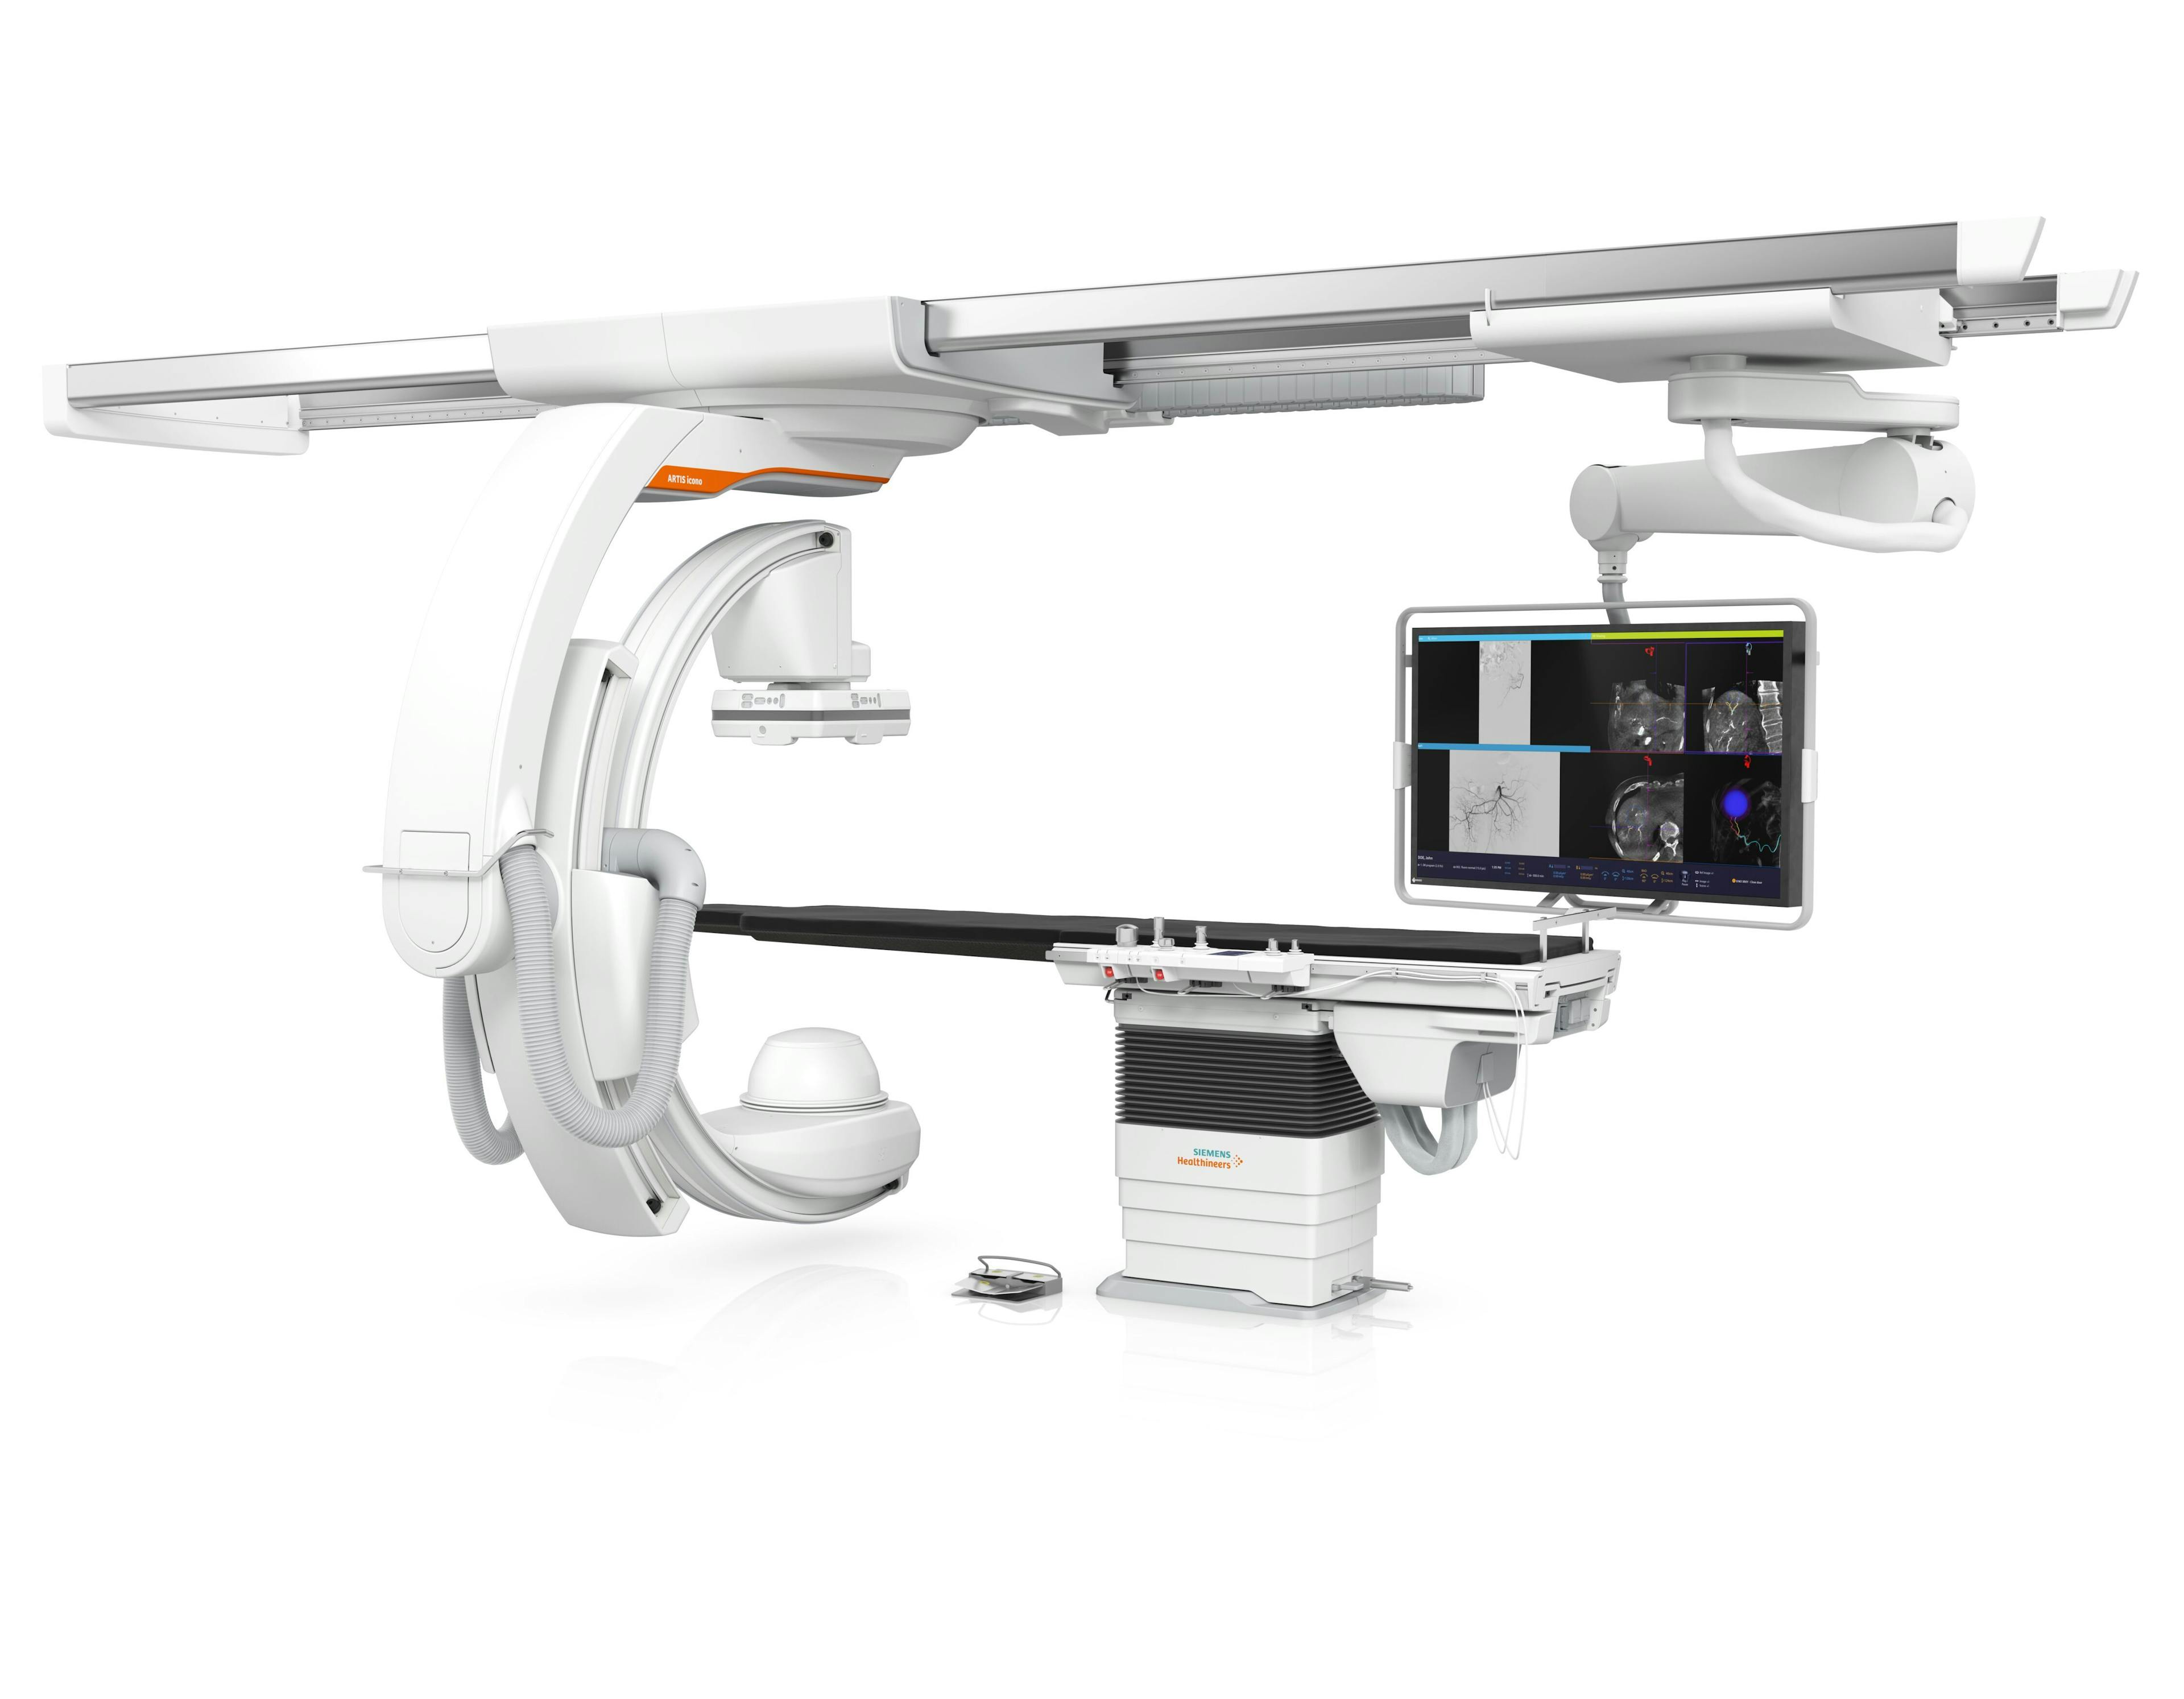 Siemens' ARTIS Icono Ceiling Angiography System Wins FDA Clearance